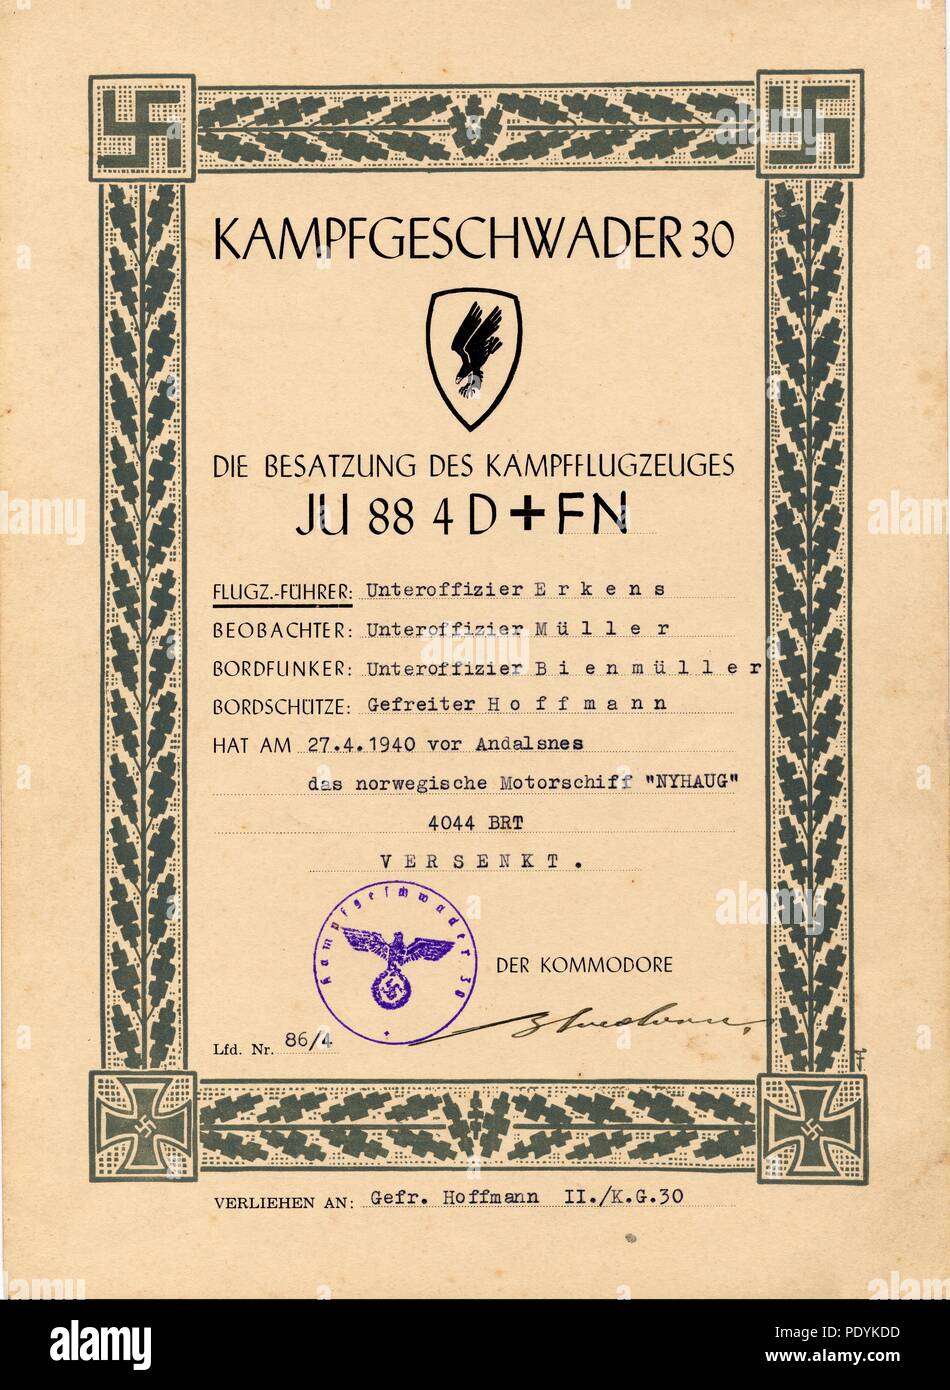 Certificate awarded to Feldwebel Willi Hoffmann of 5. Staffel, Kampfgeschwader 30: Awarded by KG 30 to Unteroffizier Willi Erkens (Pilot), Unteroffizier Richard Müller (Observer), Unteroffizier Otto Bienmüller (Radio Operator) and Gefreiter Willi Hoffmann (Air Gunner) of 5./KG 30 for sinking the Norwegian motorboat Nyhaus (misspelt on the certificate) off Andalsnes on 27th April 1940, while crewing Junkers Ju 88 4D+FN. The document is signed in ink by Major Erich Bloedorn, Kommodore of Kampfgeschwader 30. Stock Photo